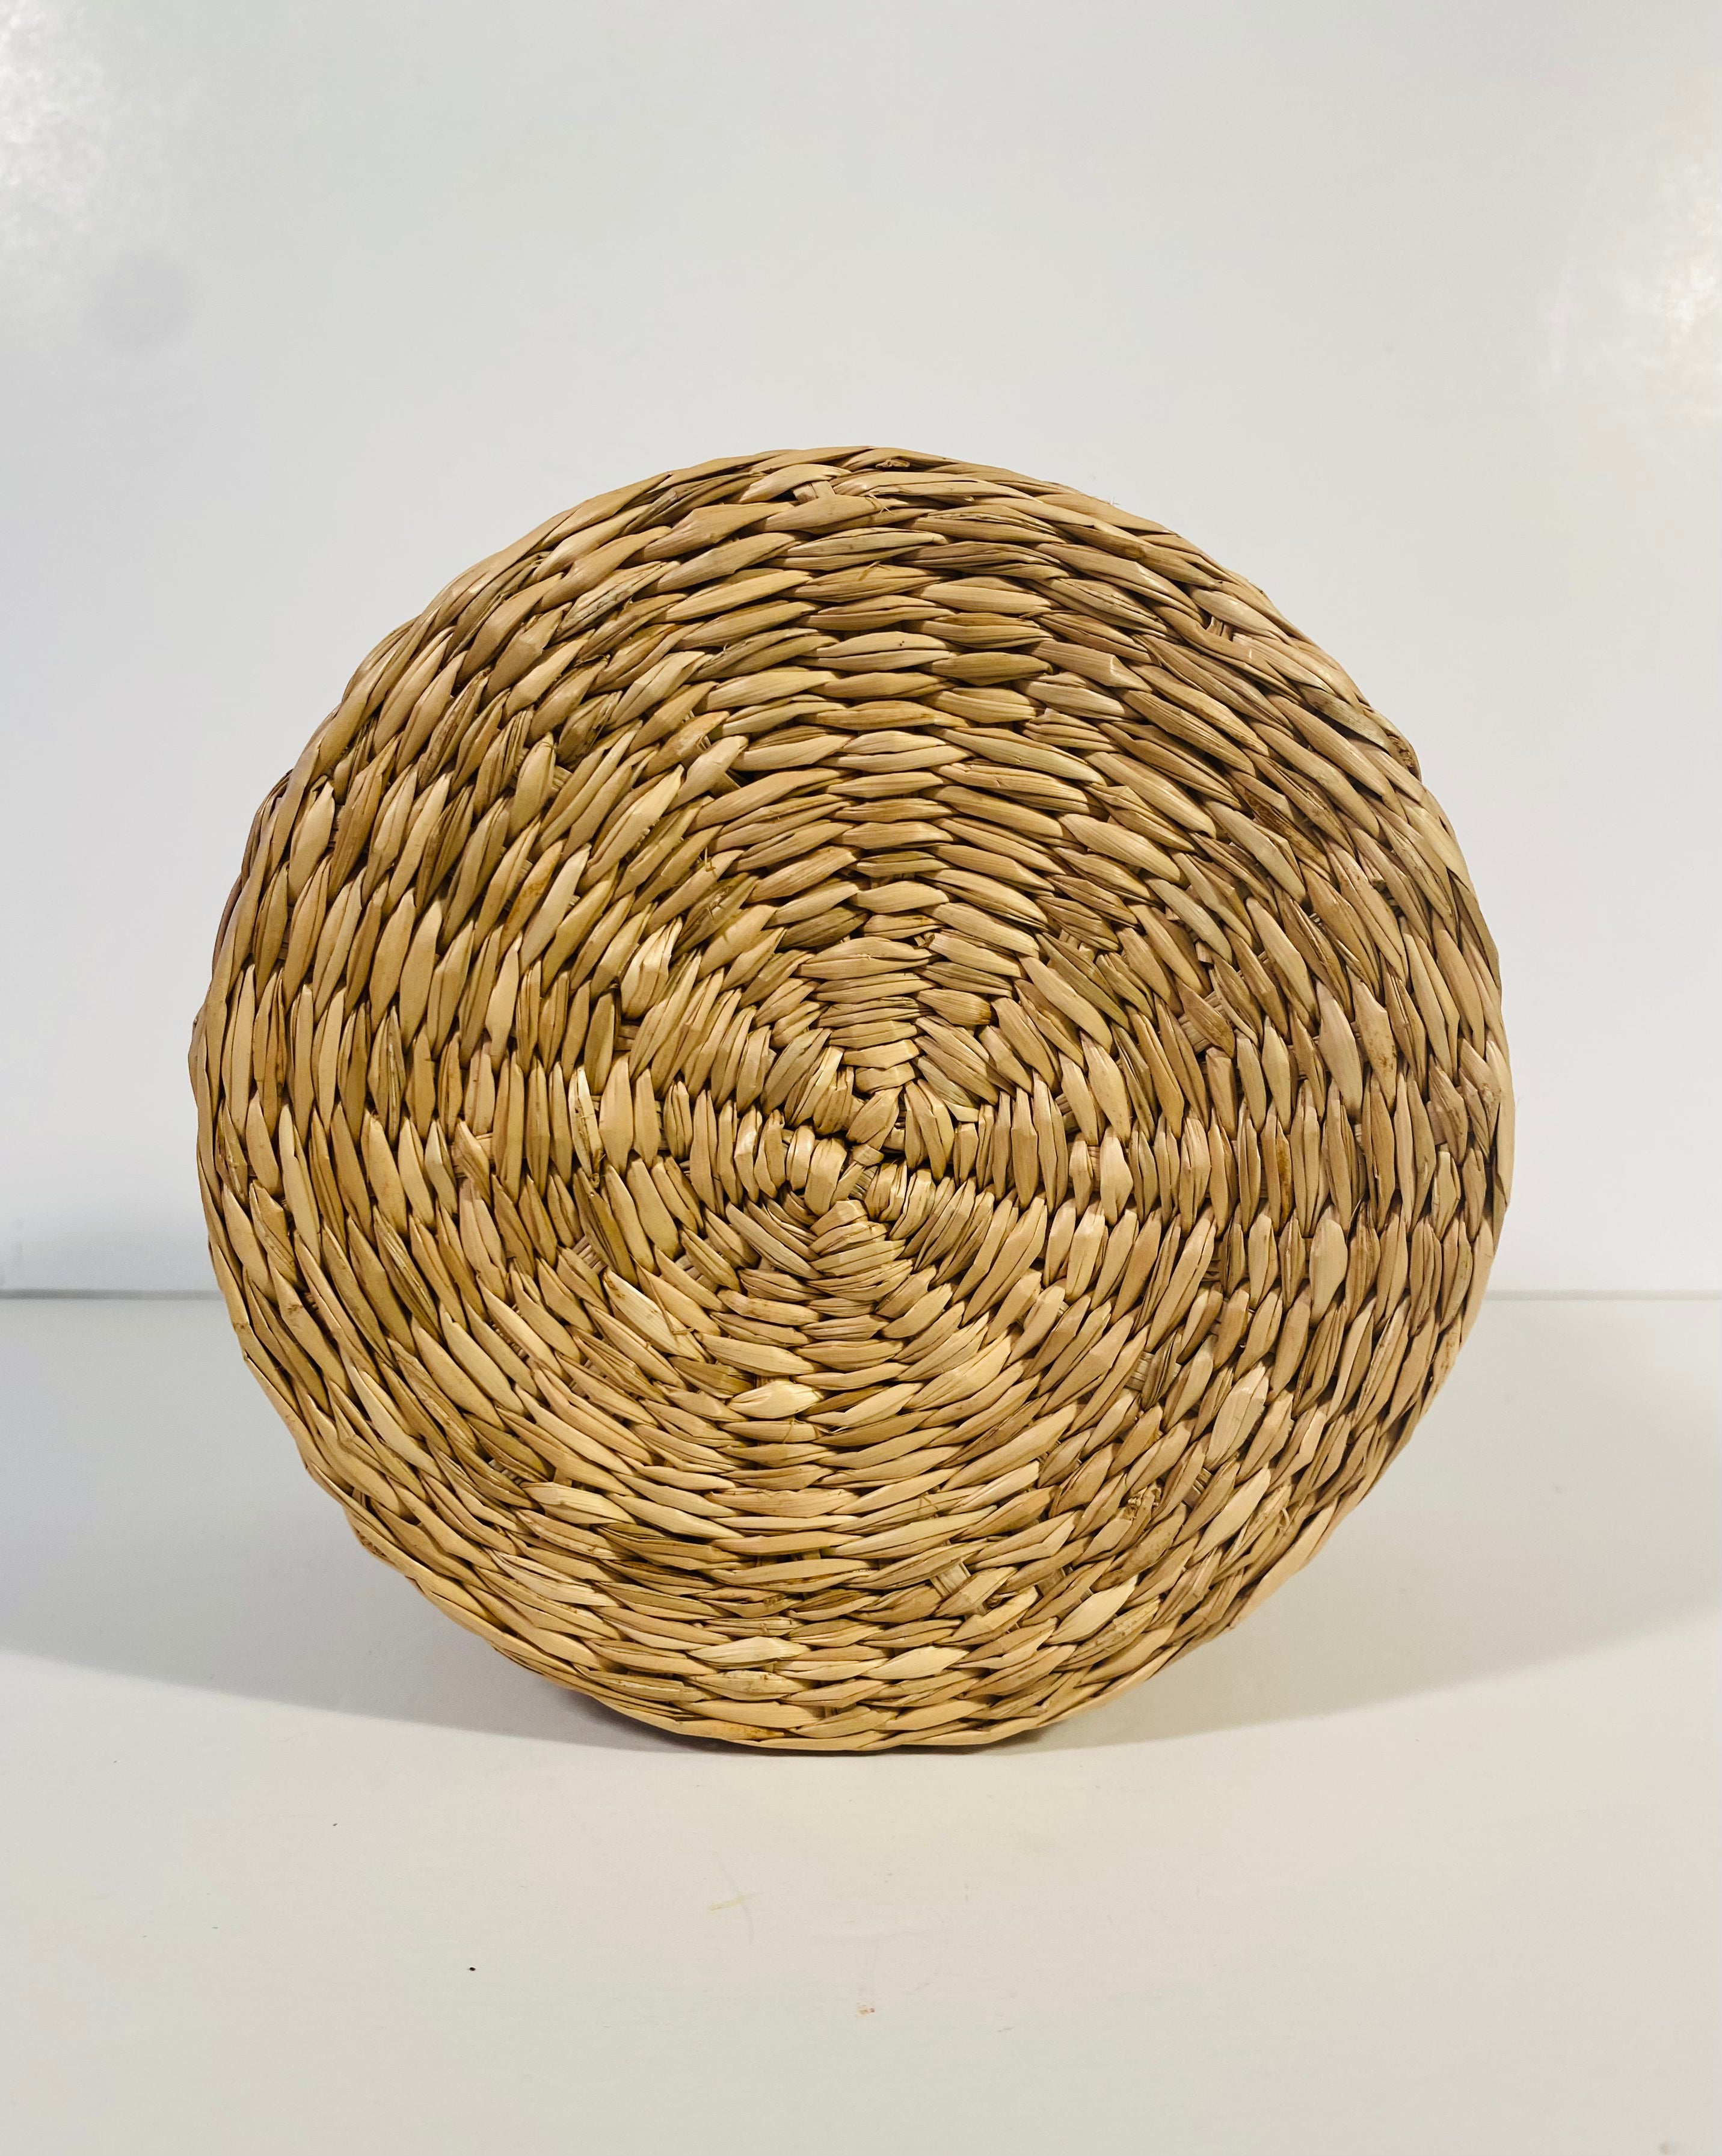 Vintage Wicker Nesting Baskets With Lids